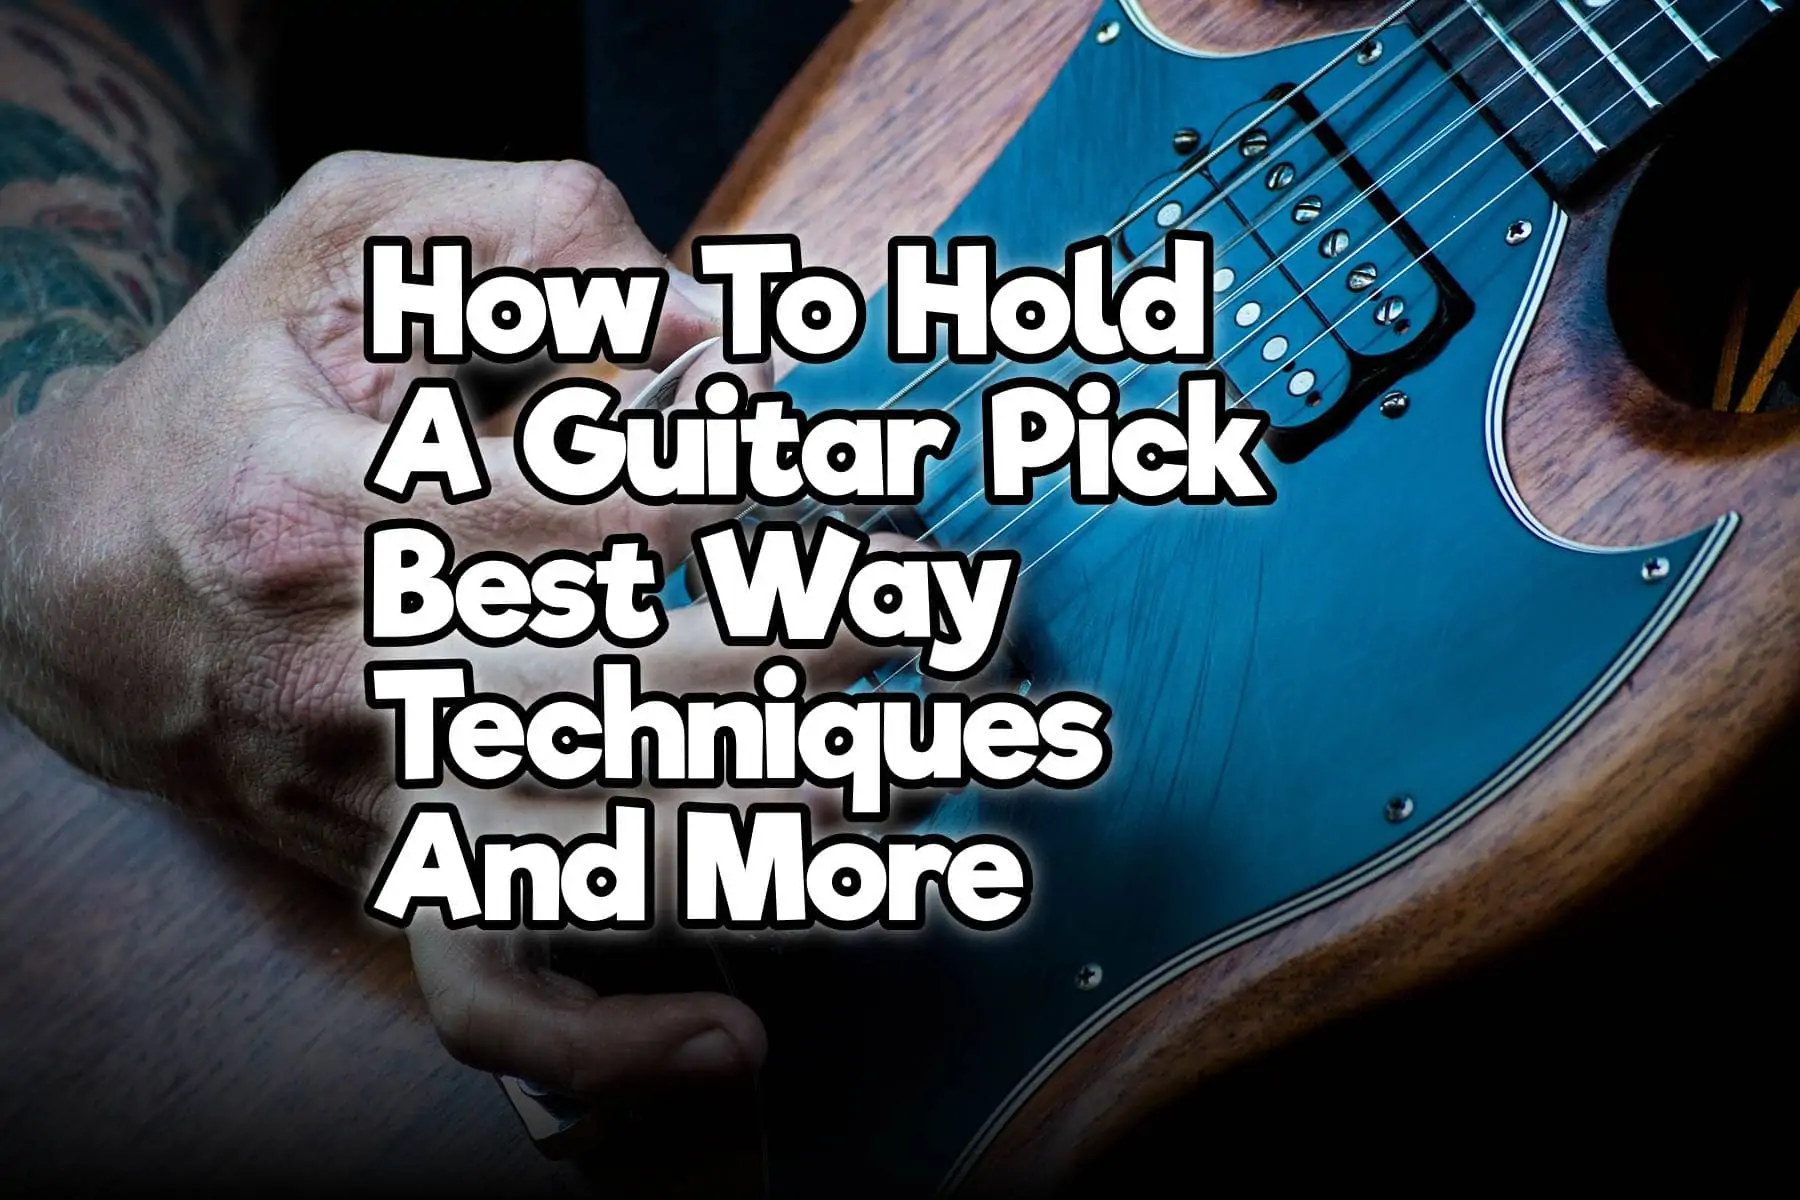 How to Easily Hold a Guitar Pick